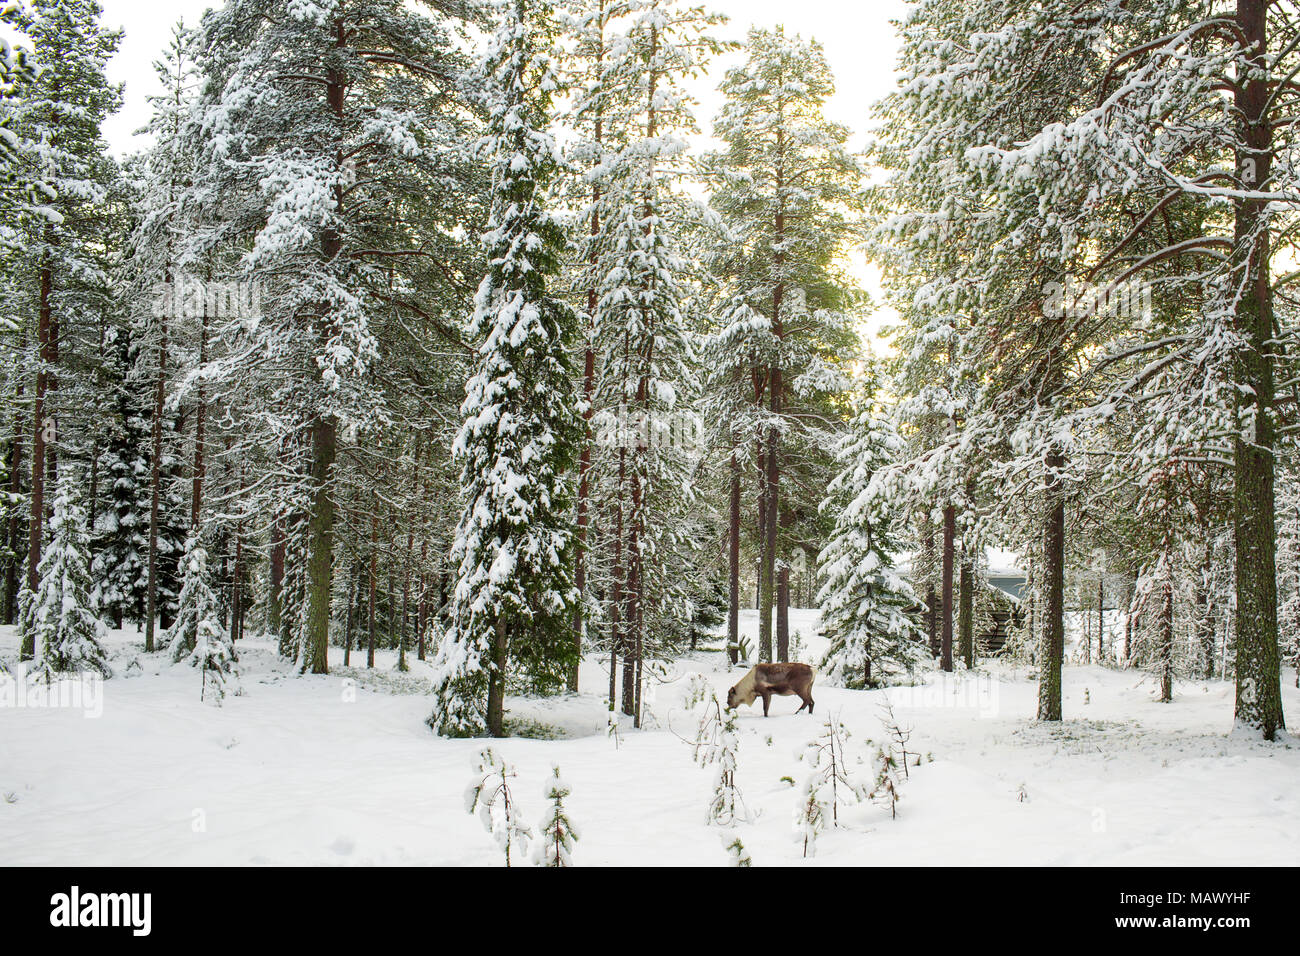 Beautiful Scenic View Of Snowy Forest With Tall Pine Trees And A Reindeer  During Winter In Lapland Finland, Season's Greeting Christmas Stock Photo